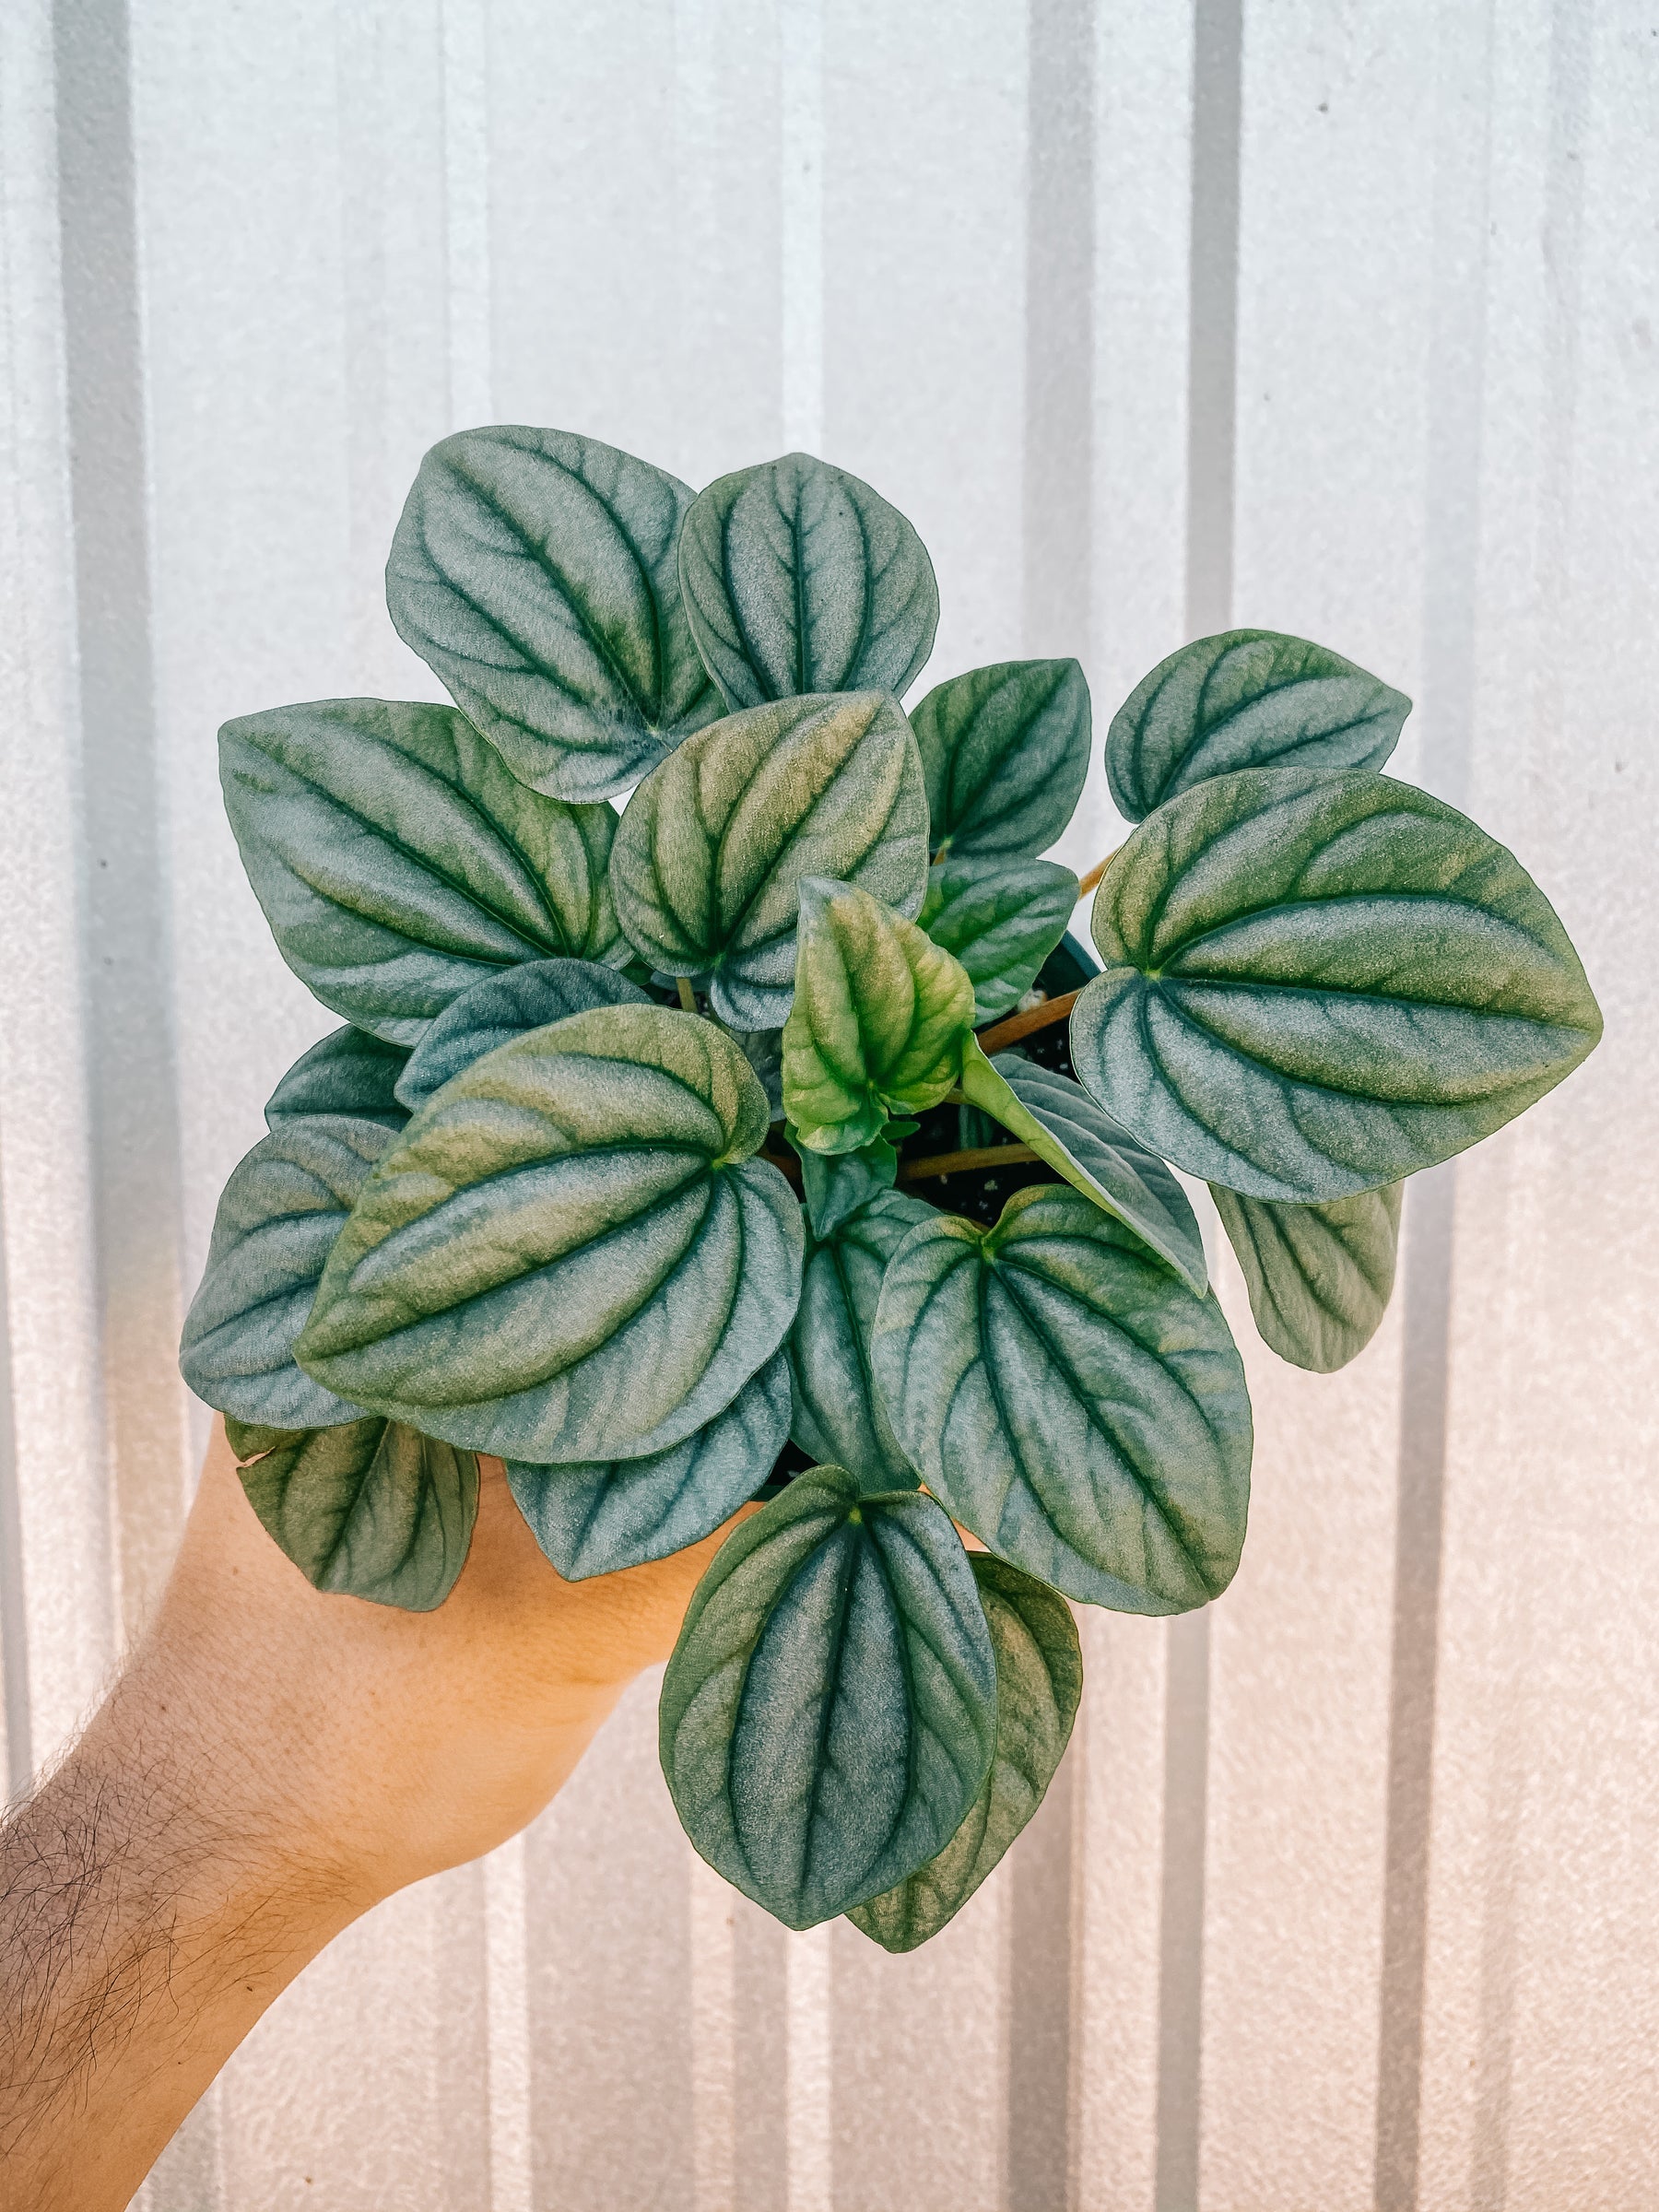 4" Peperomia 'frost'